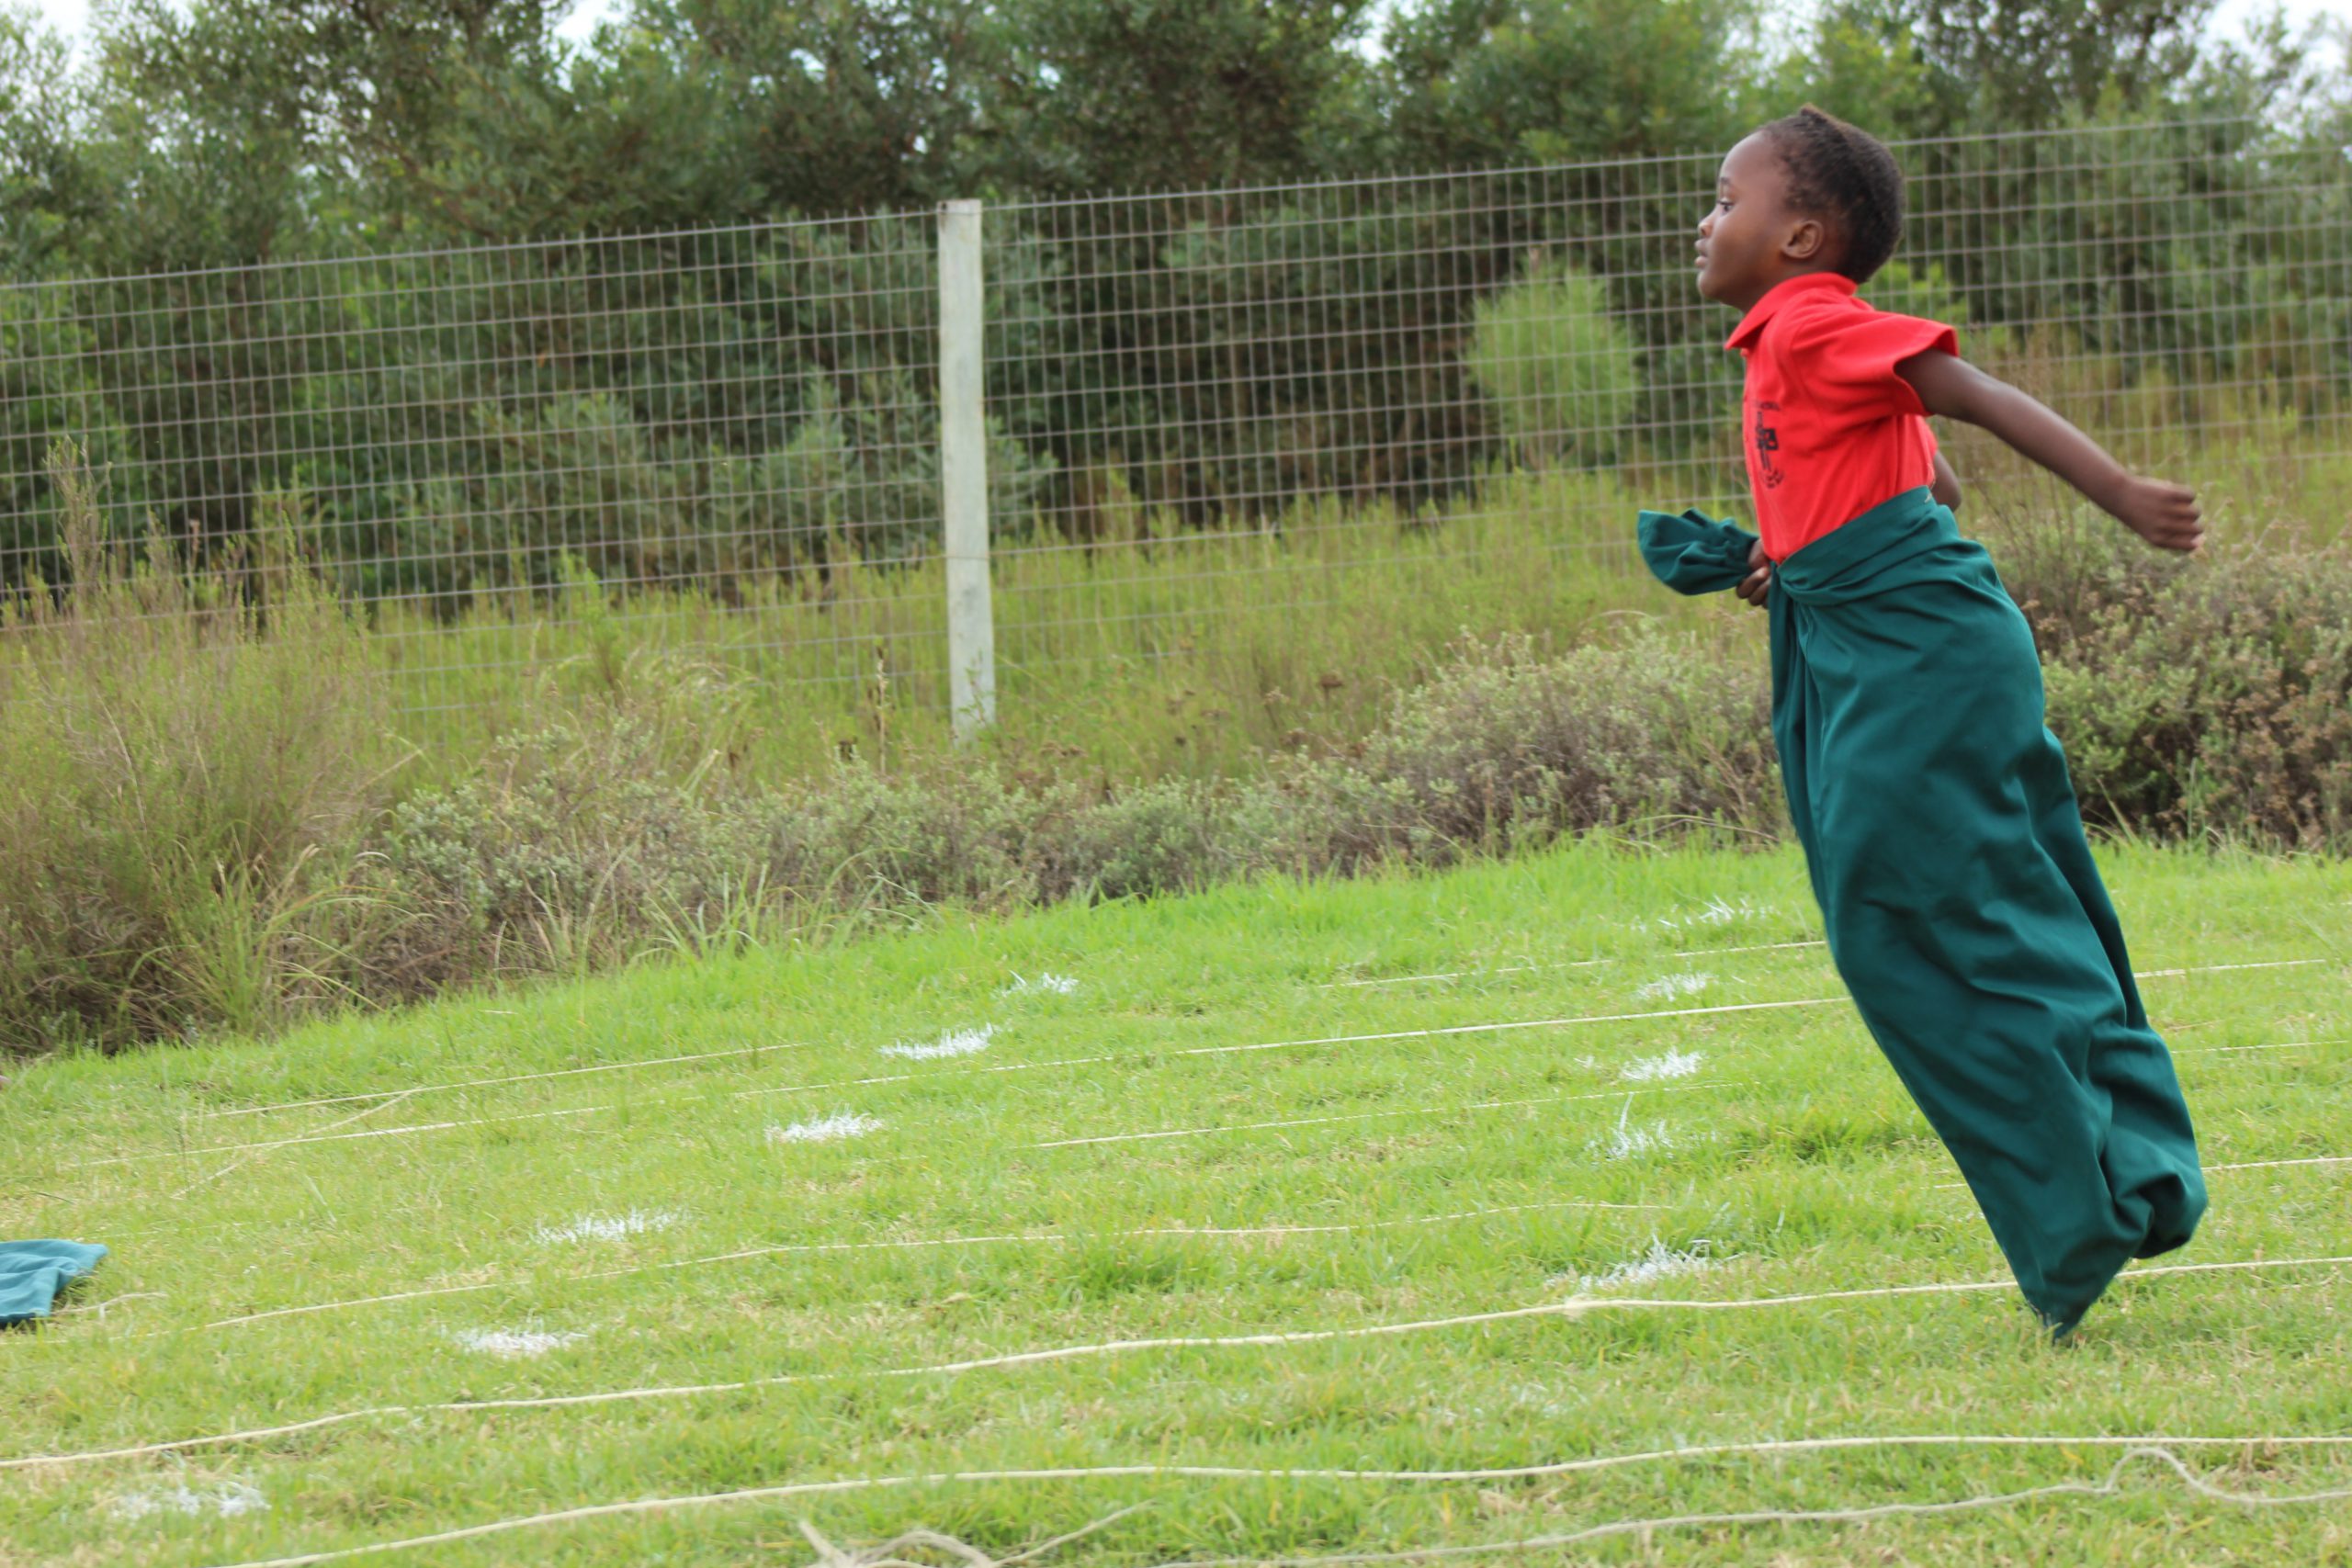 Holy Cross learners participating in sack racing during sports day. Photo: supplied